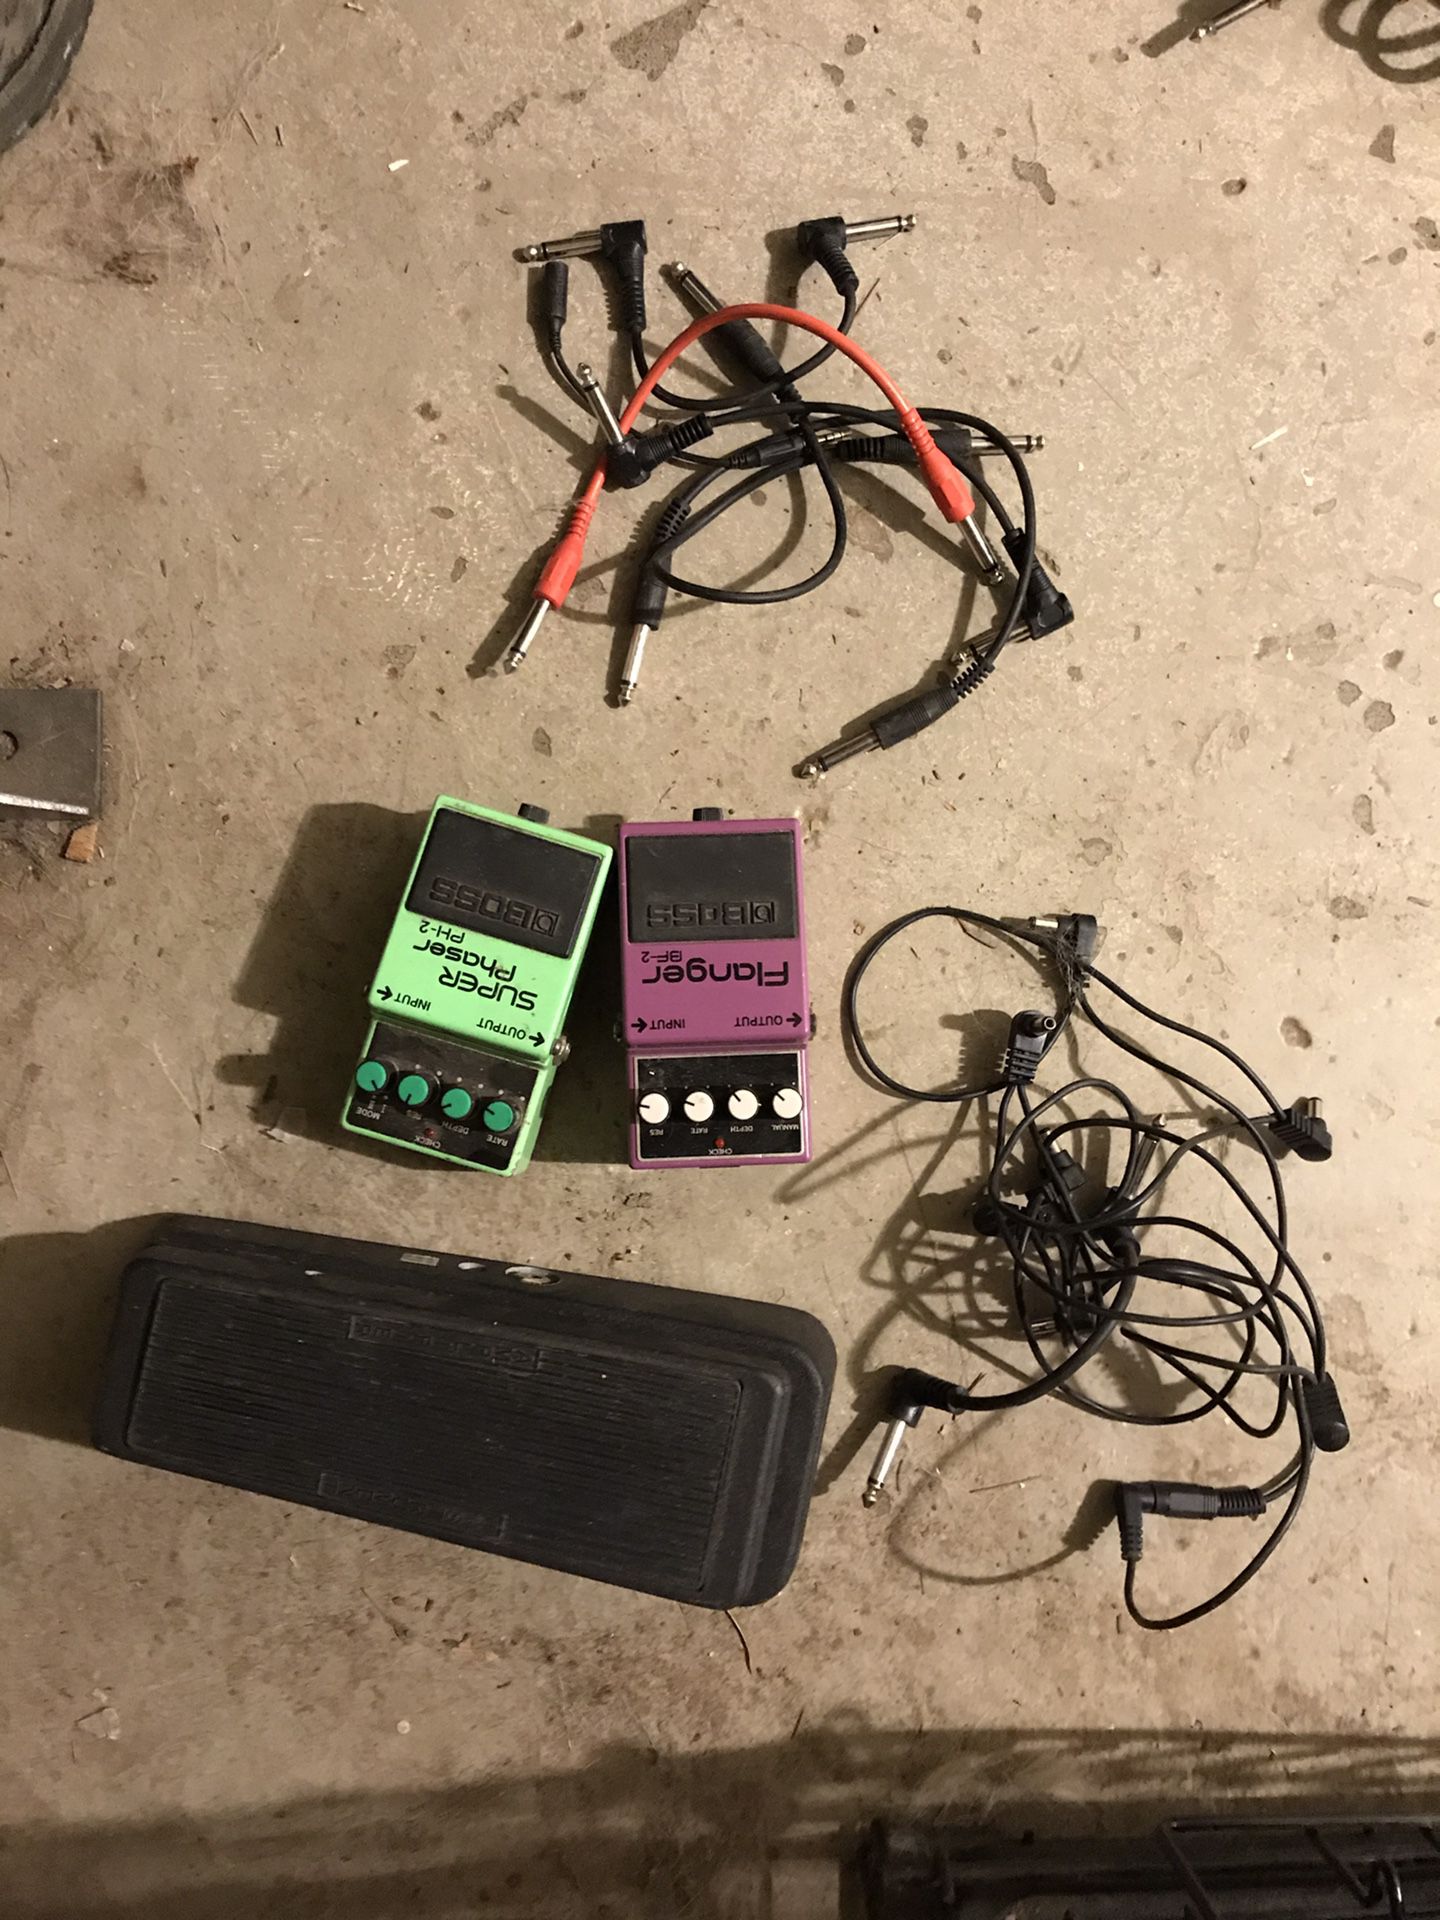 Guitar pedals and cables